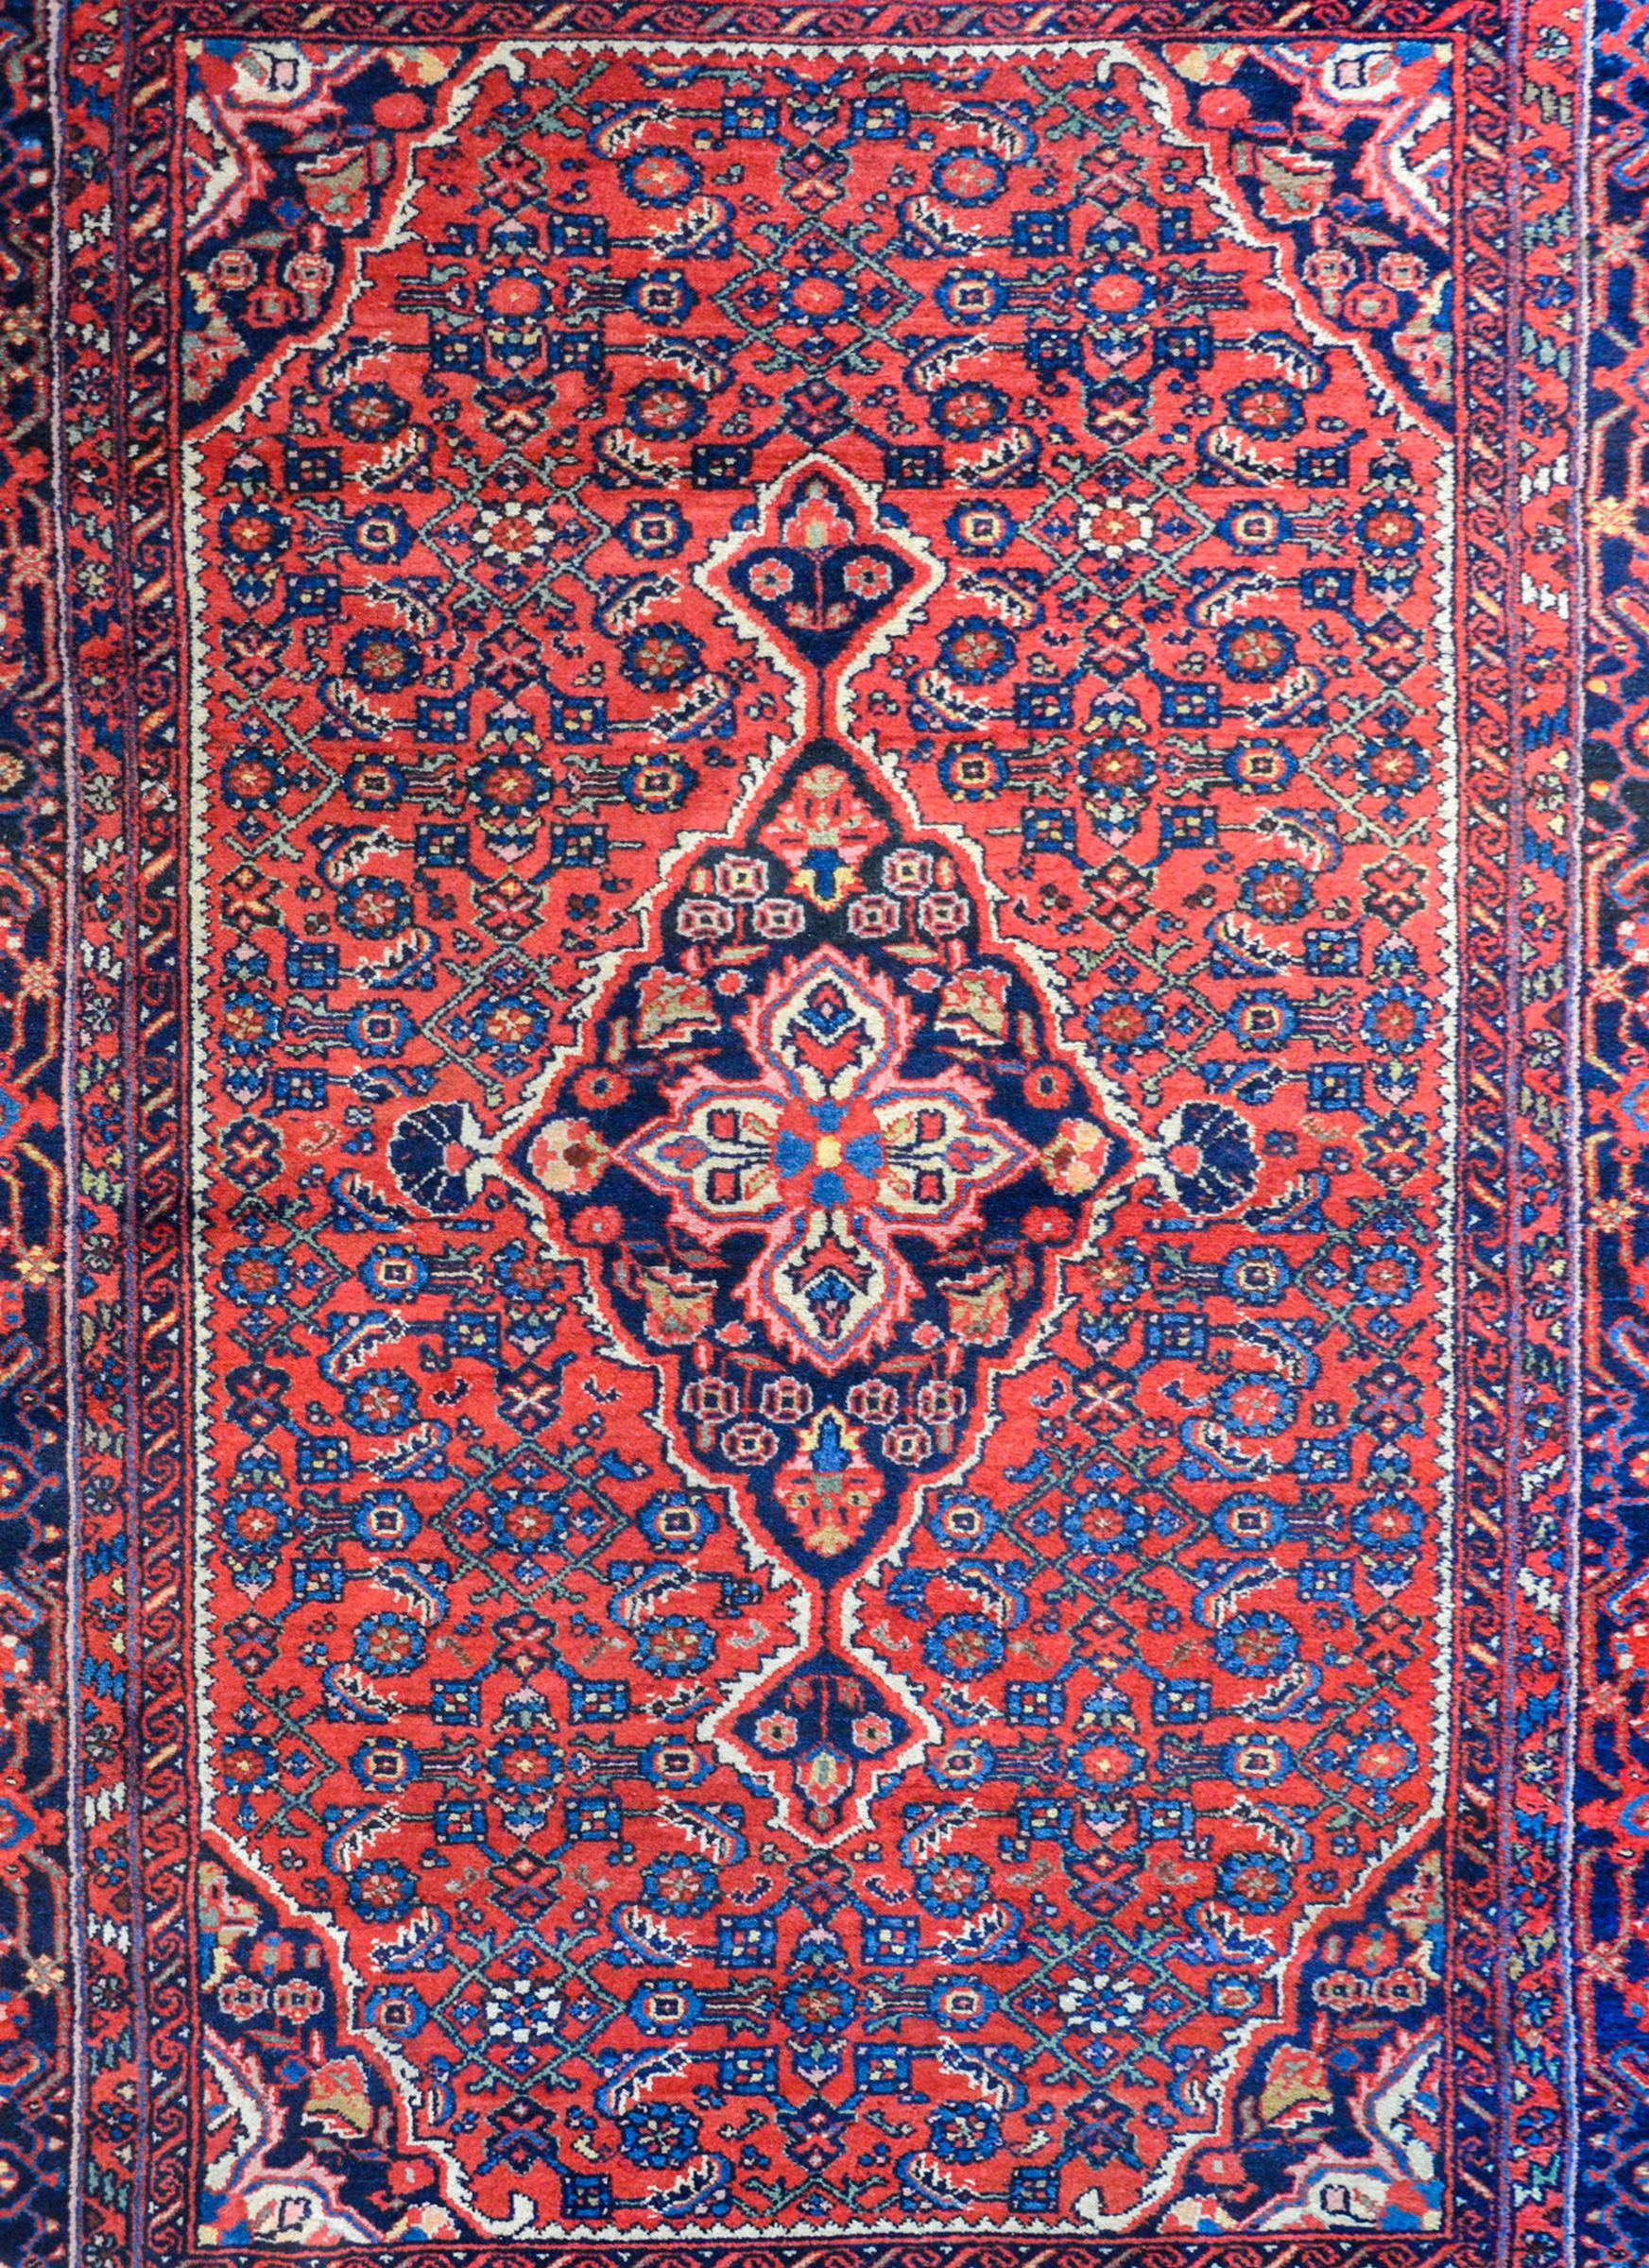 A wonderful early 20th century Persian Malayer rug with a large central diamond medallion on a field of trellis and myriad flowers all woven in light and dark indigo and white vegetable dyed wool on a crimson background. The border is wide with